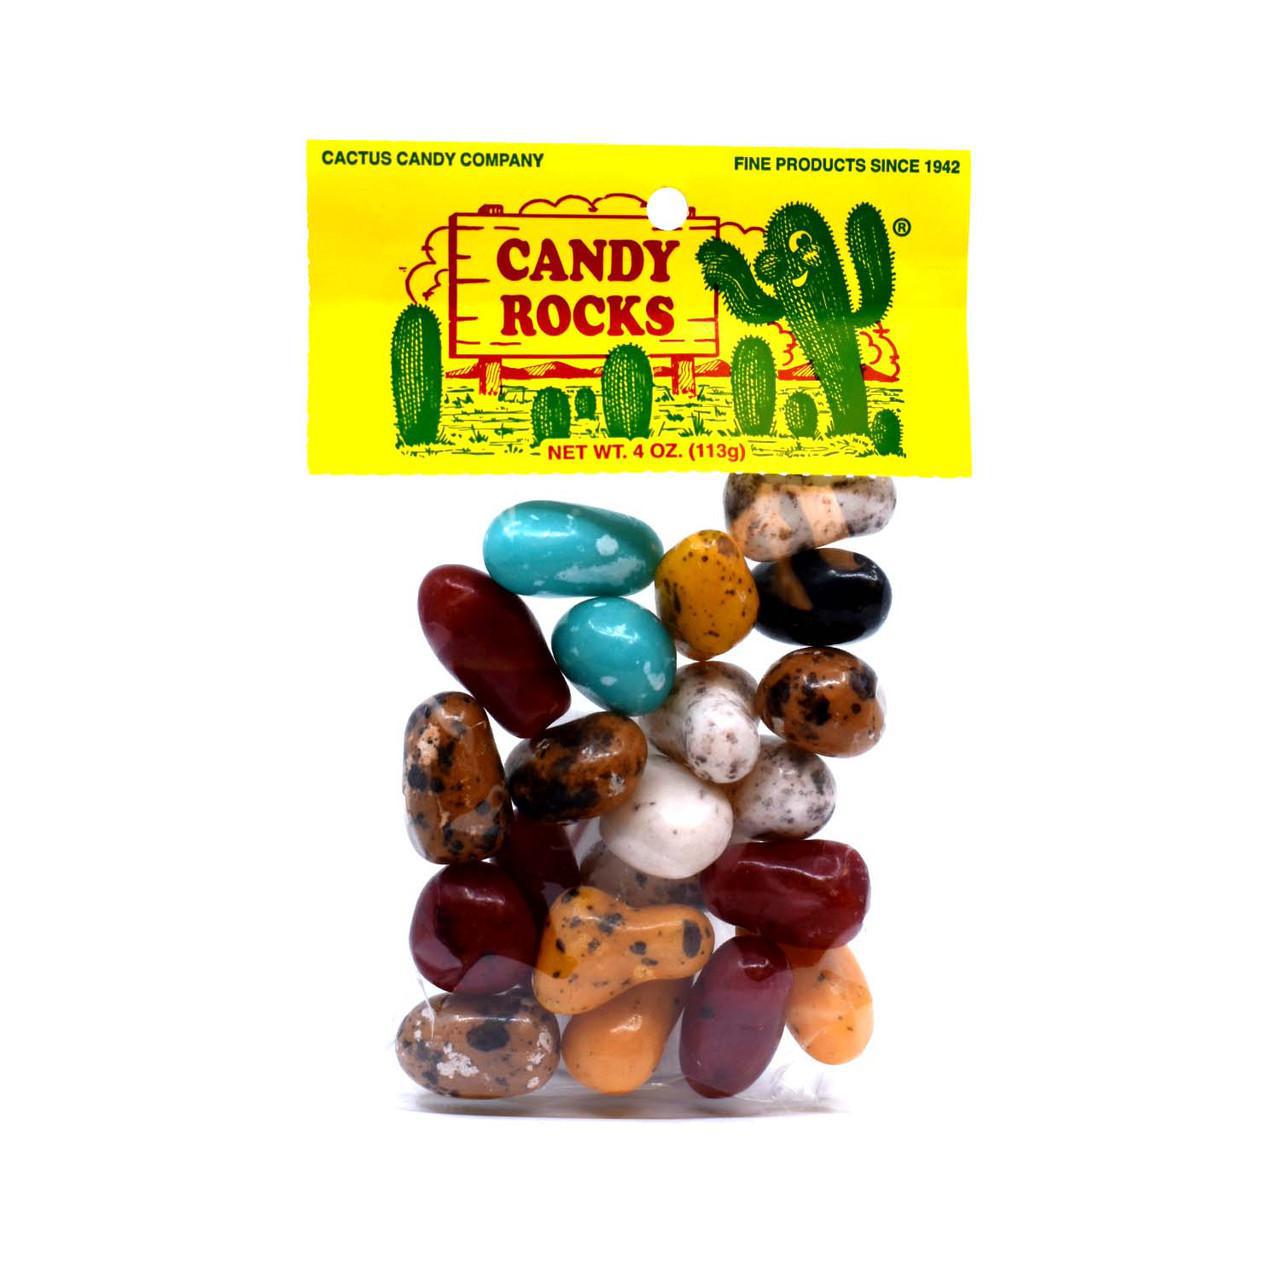 Cactus Candy - Candy Rocks